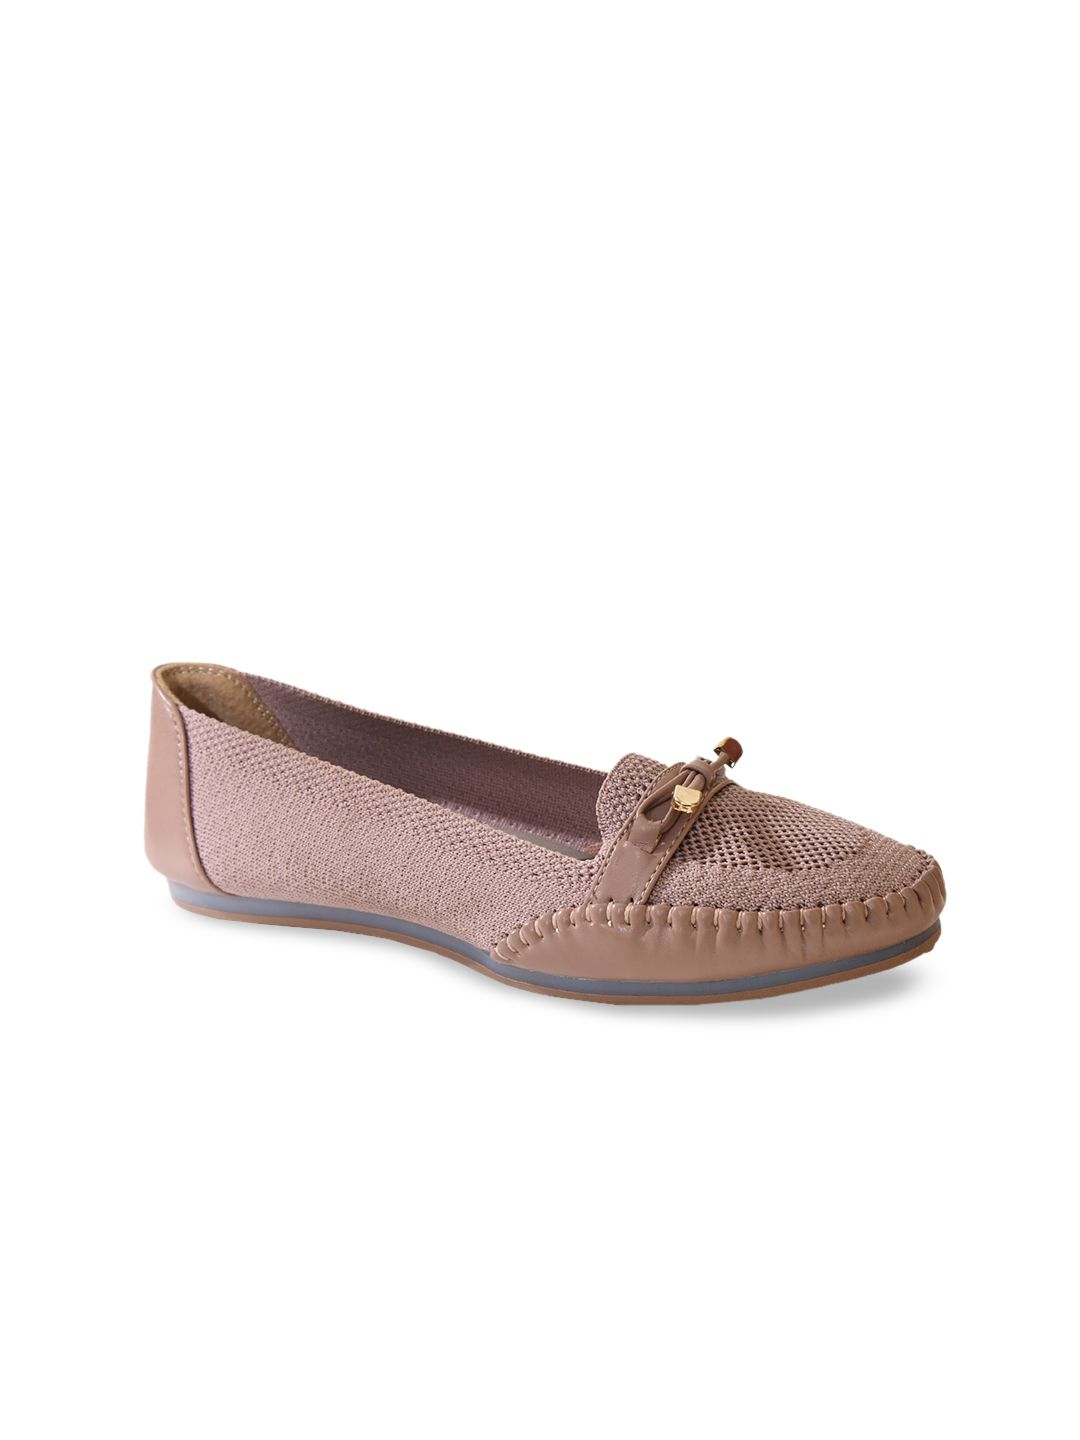 Ajanta Women Woven Design Lightweight Mesh Comfort Insole Loafers With Bows Price in India